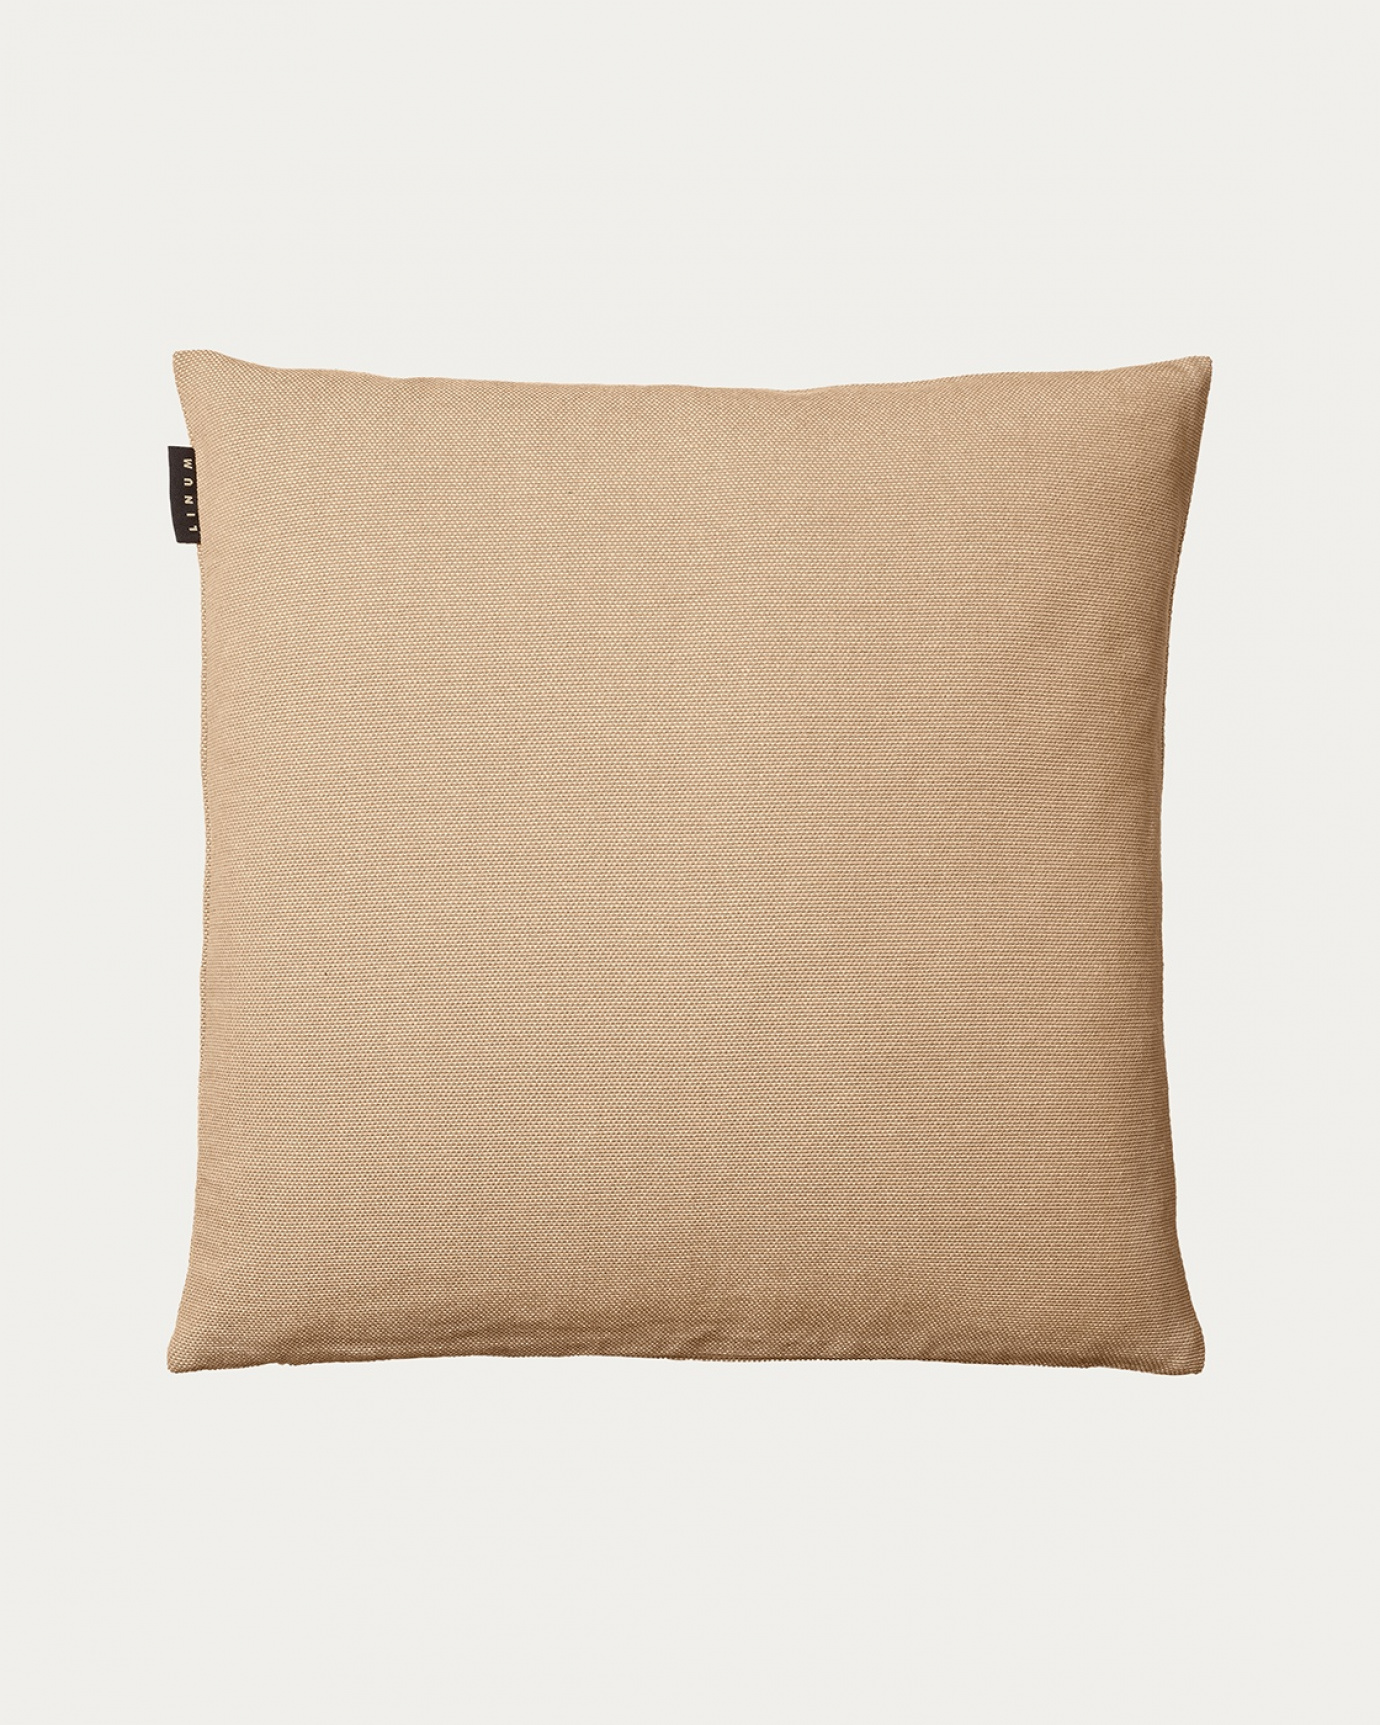 Product image camel brown PEPPER cushion cover made of soft cotton from LINUM DESIGN. Easy to wash and durable for generations. Size 50x50 cm.